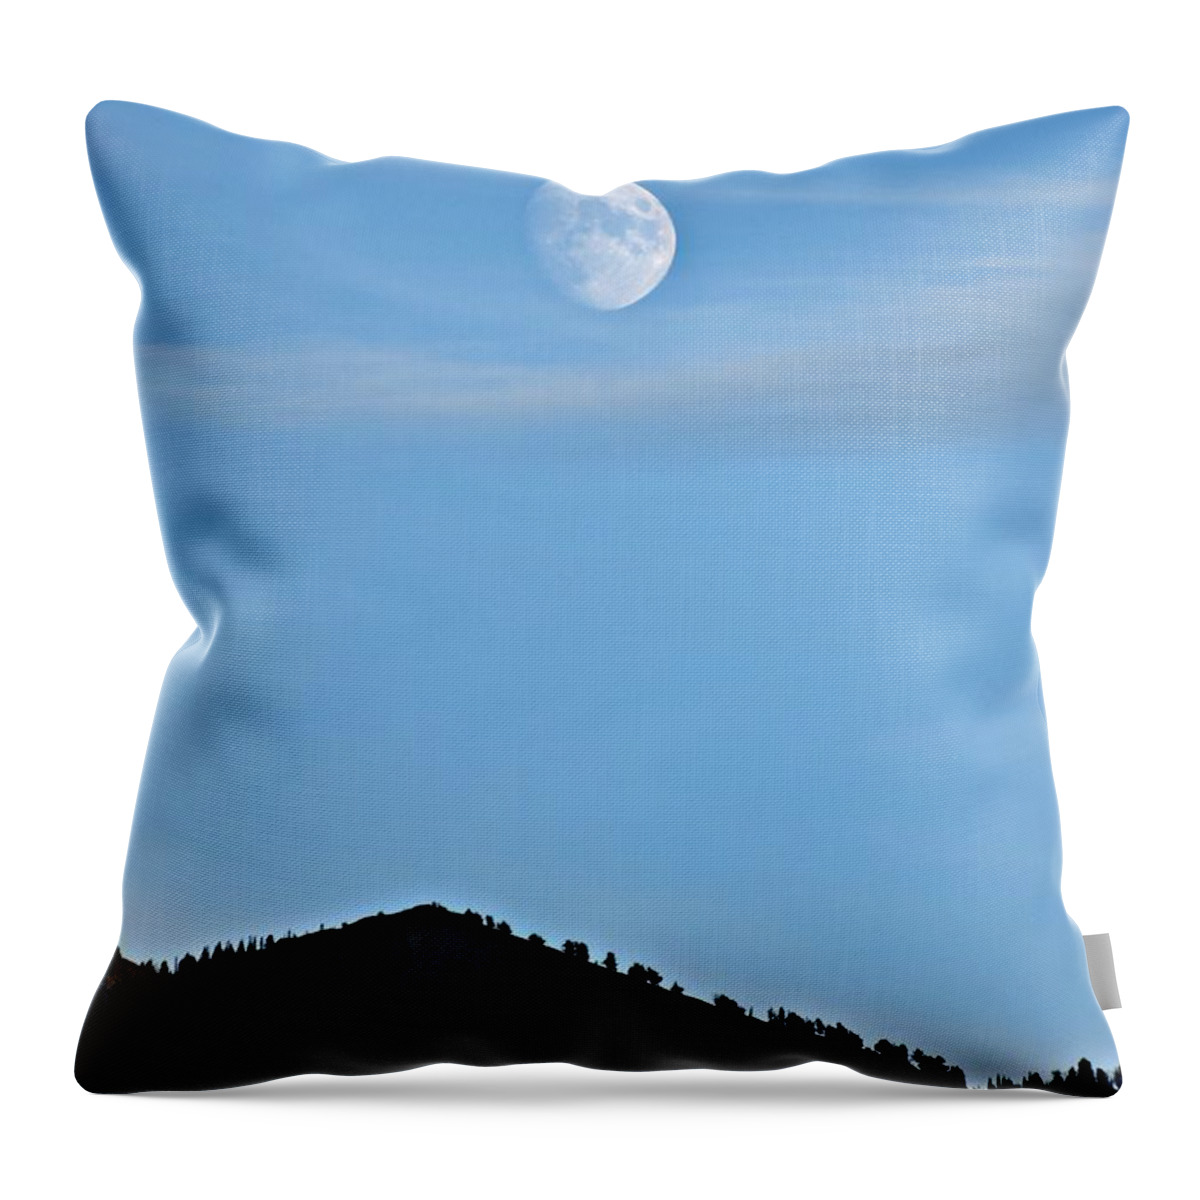 Moon Throw Pillow featuring the photograph Moon Over the Mountains by Dorrene BrownButterfield